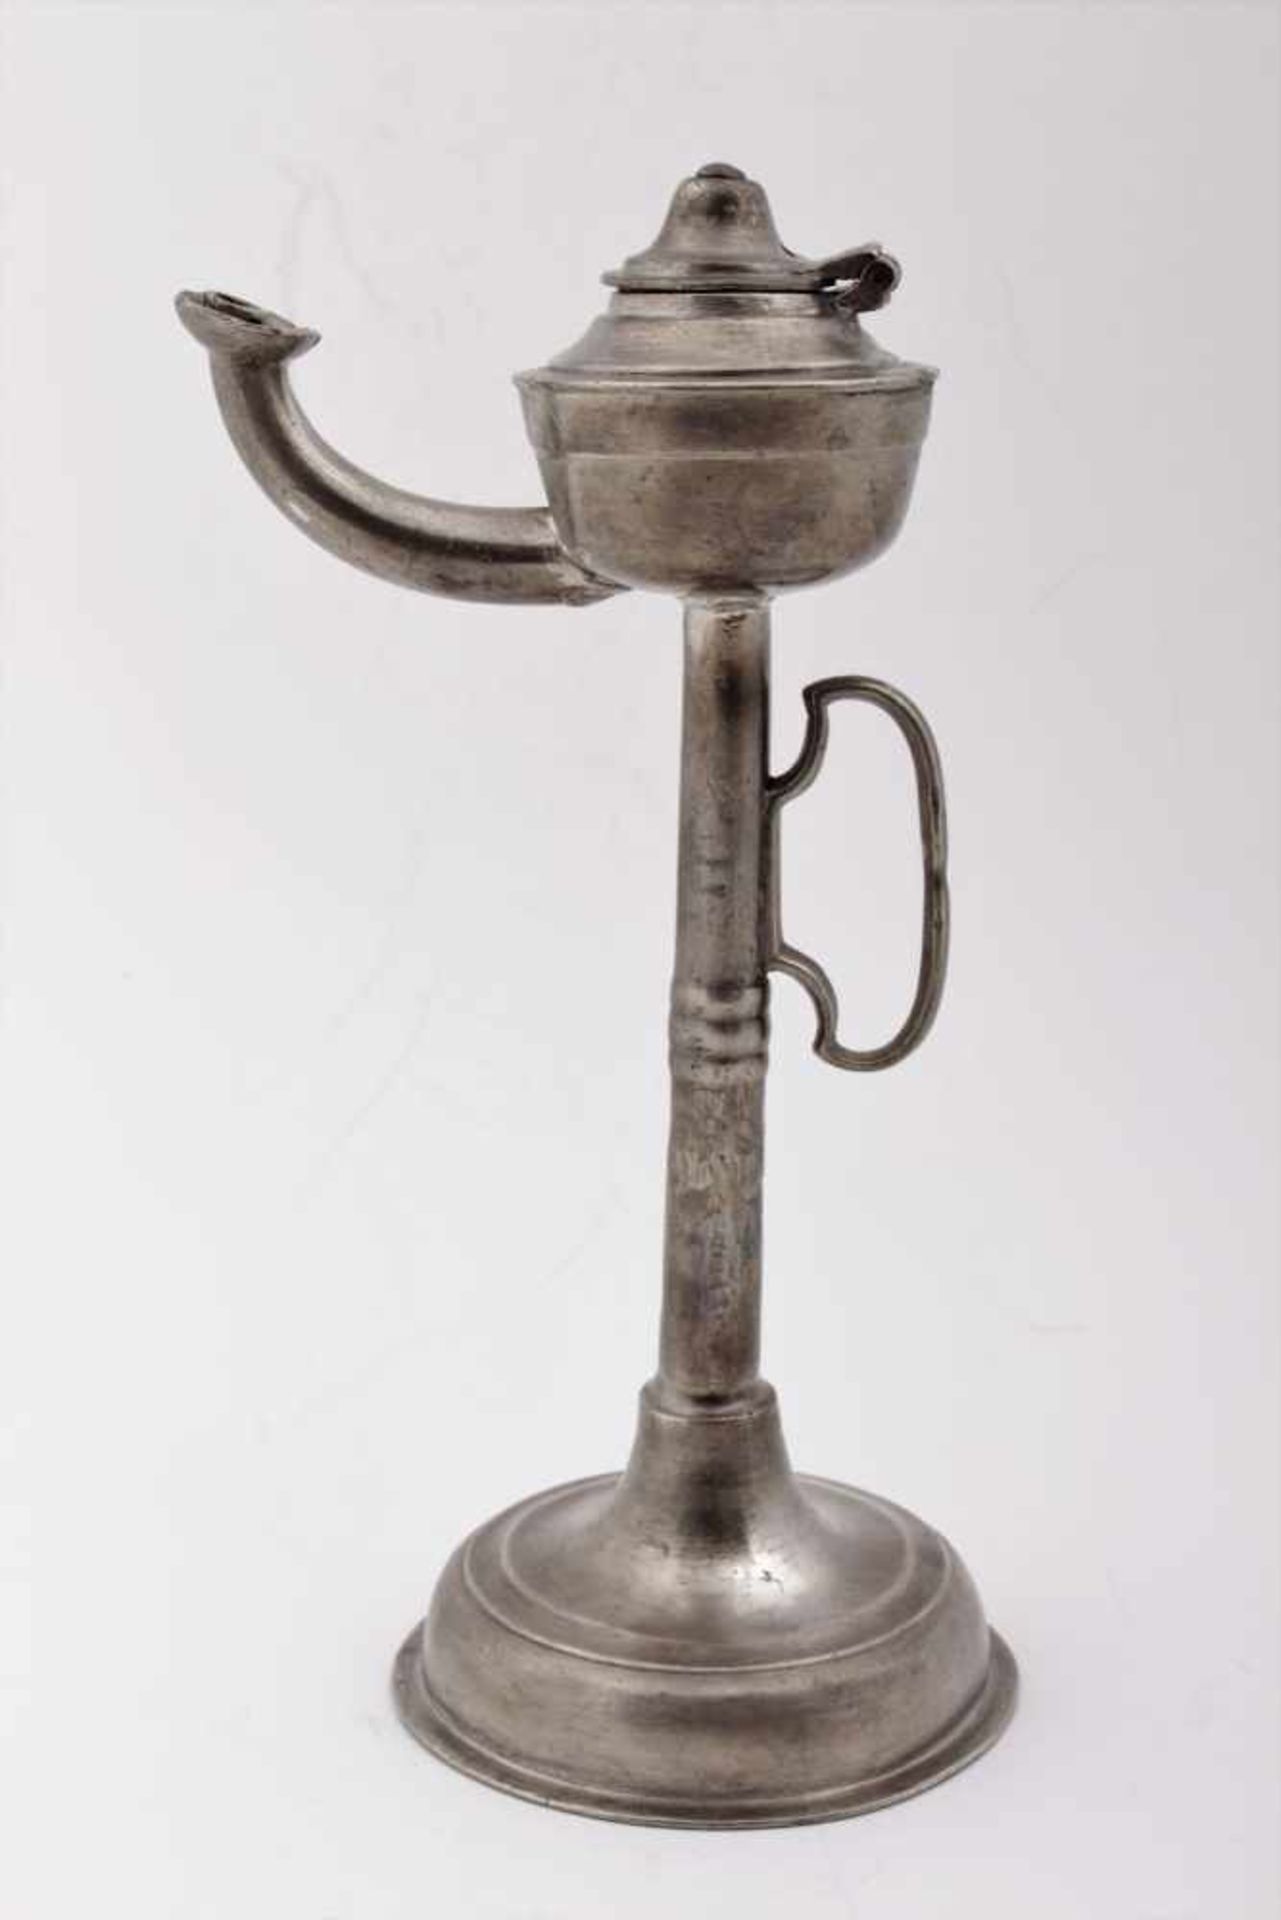 Pewter oil lamp Middle Europe, 2nd half of the 18th century, pewter lamp, was professionally